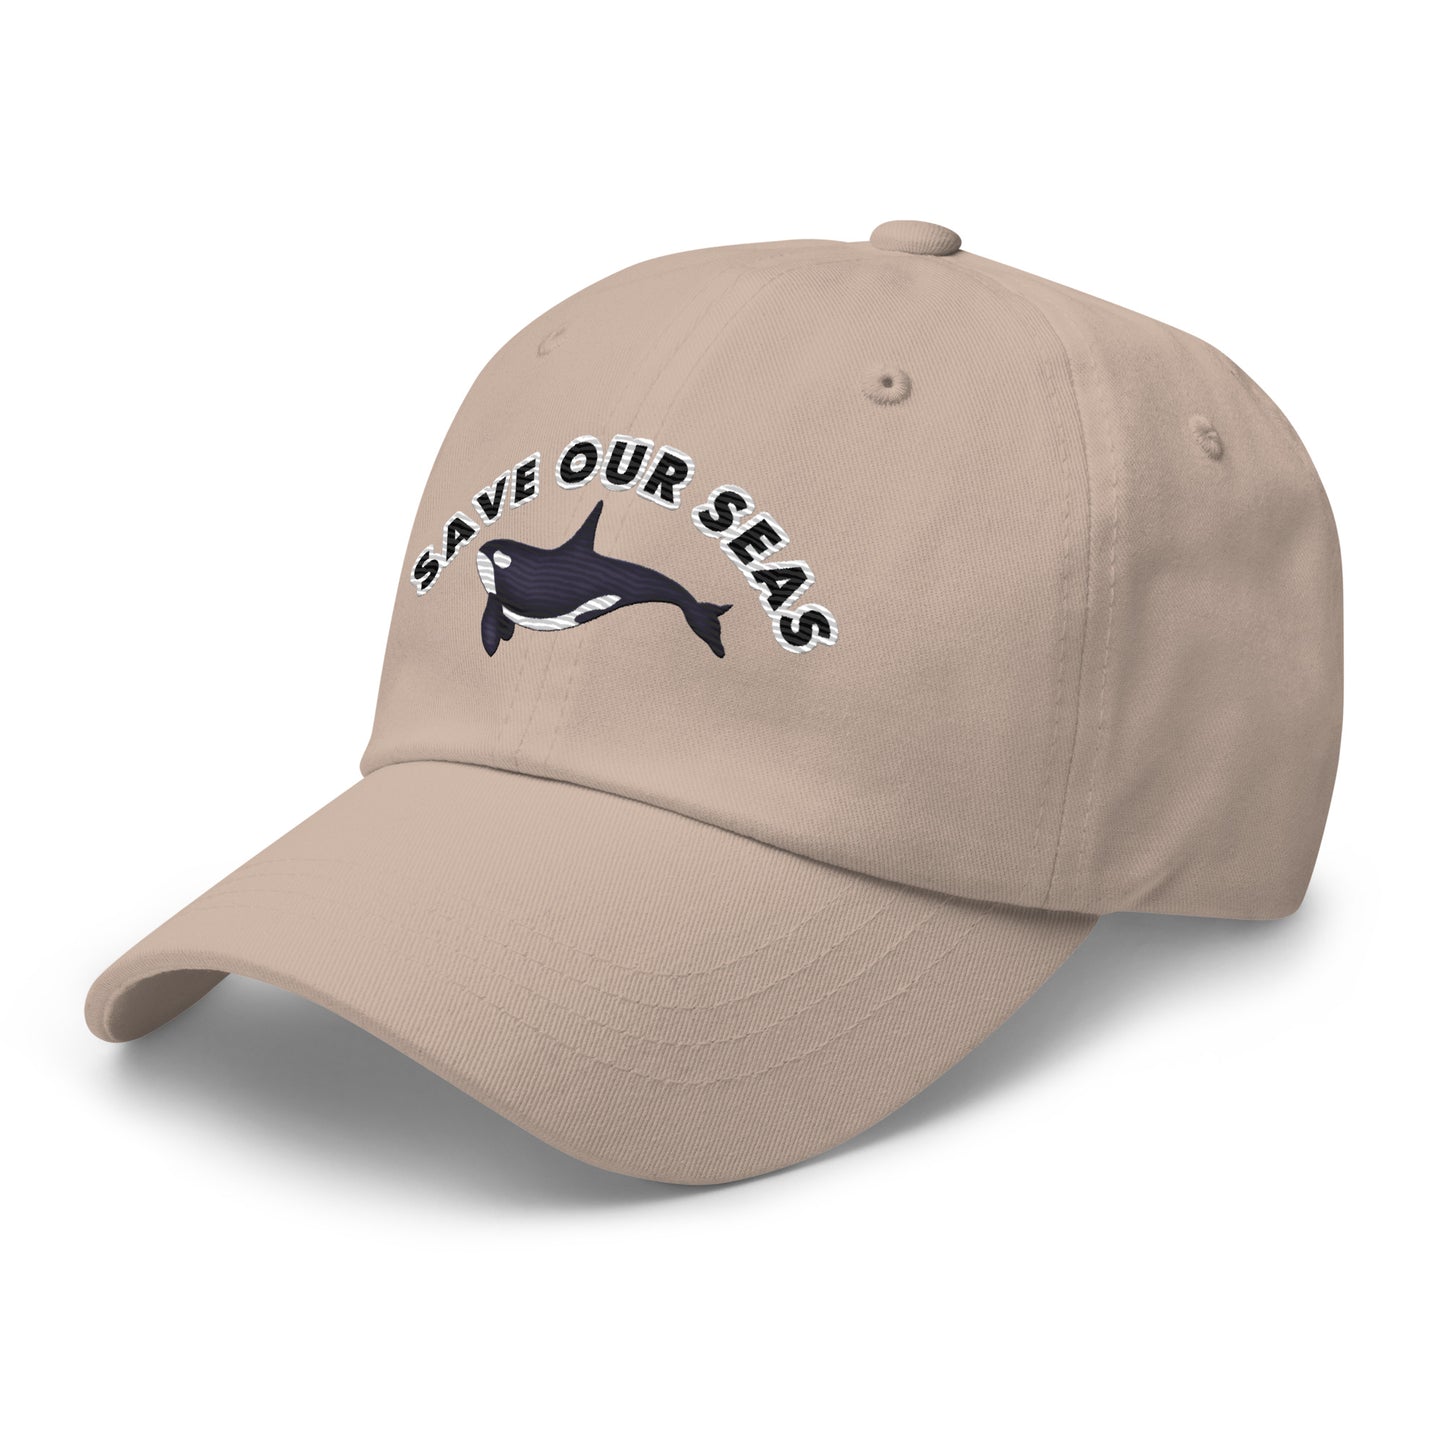 Save Our Seas Orca Dad hat: Pulls 4 pounds of ocean plastic!